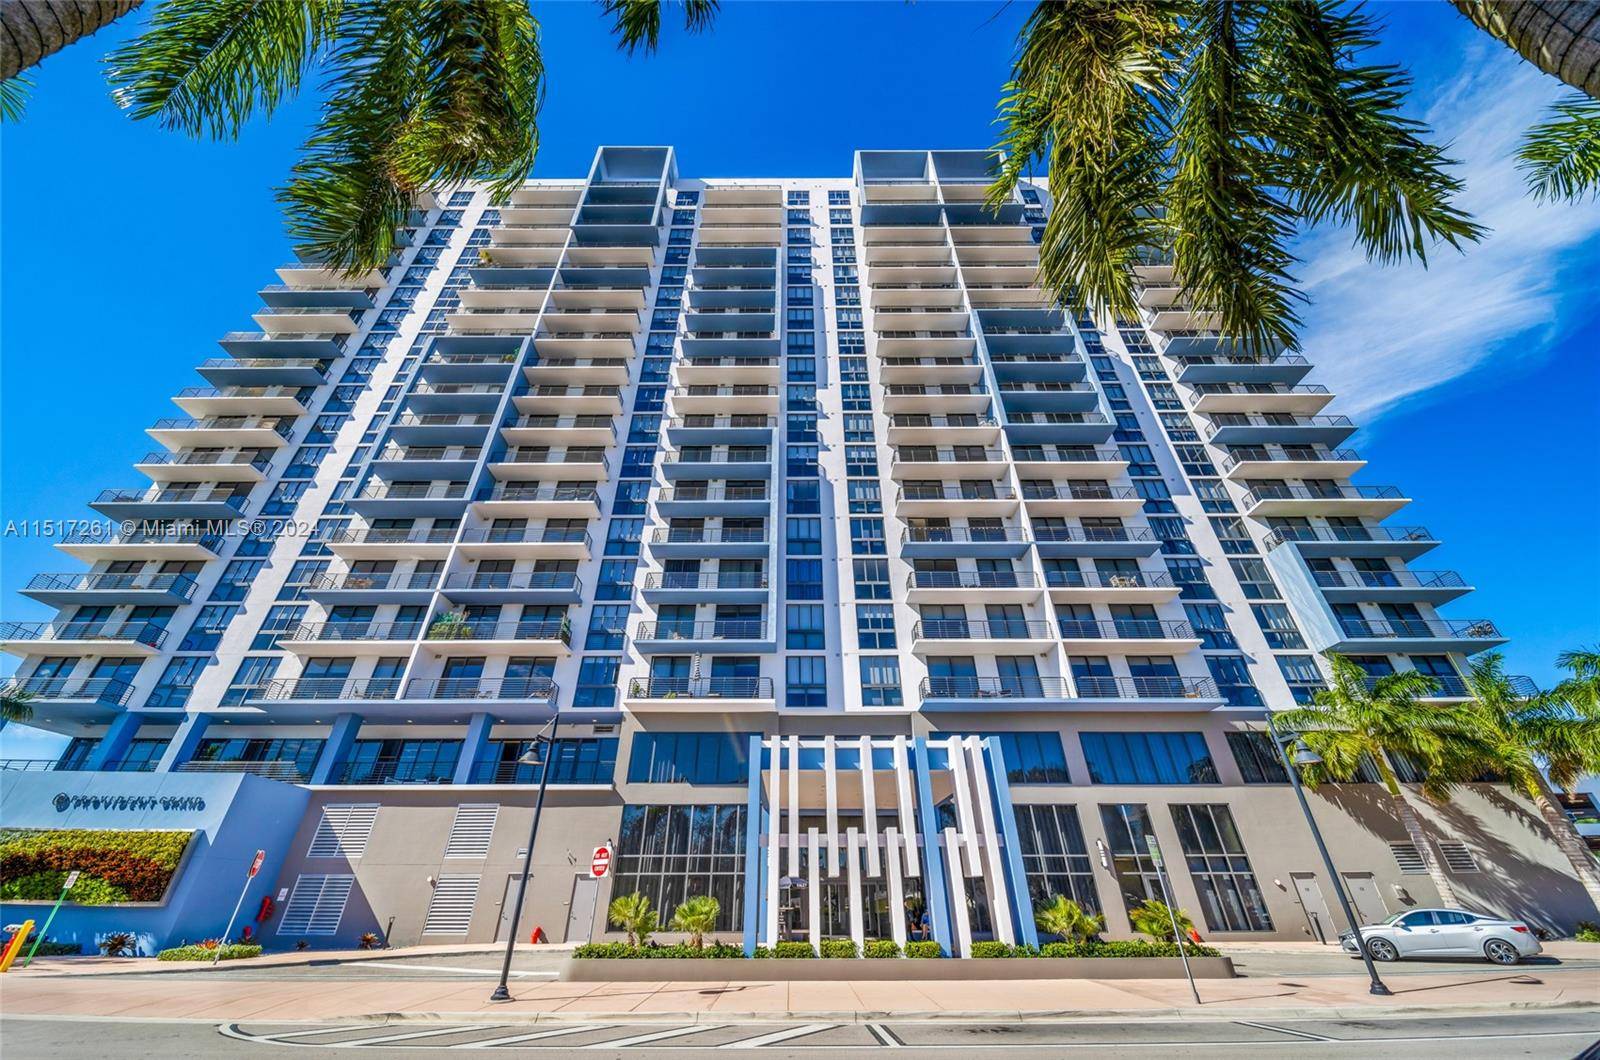 This spectacular 1 bedroom, 1 bathroom condo is located in the heart of Downtown Doral.